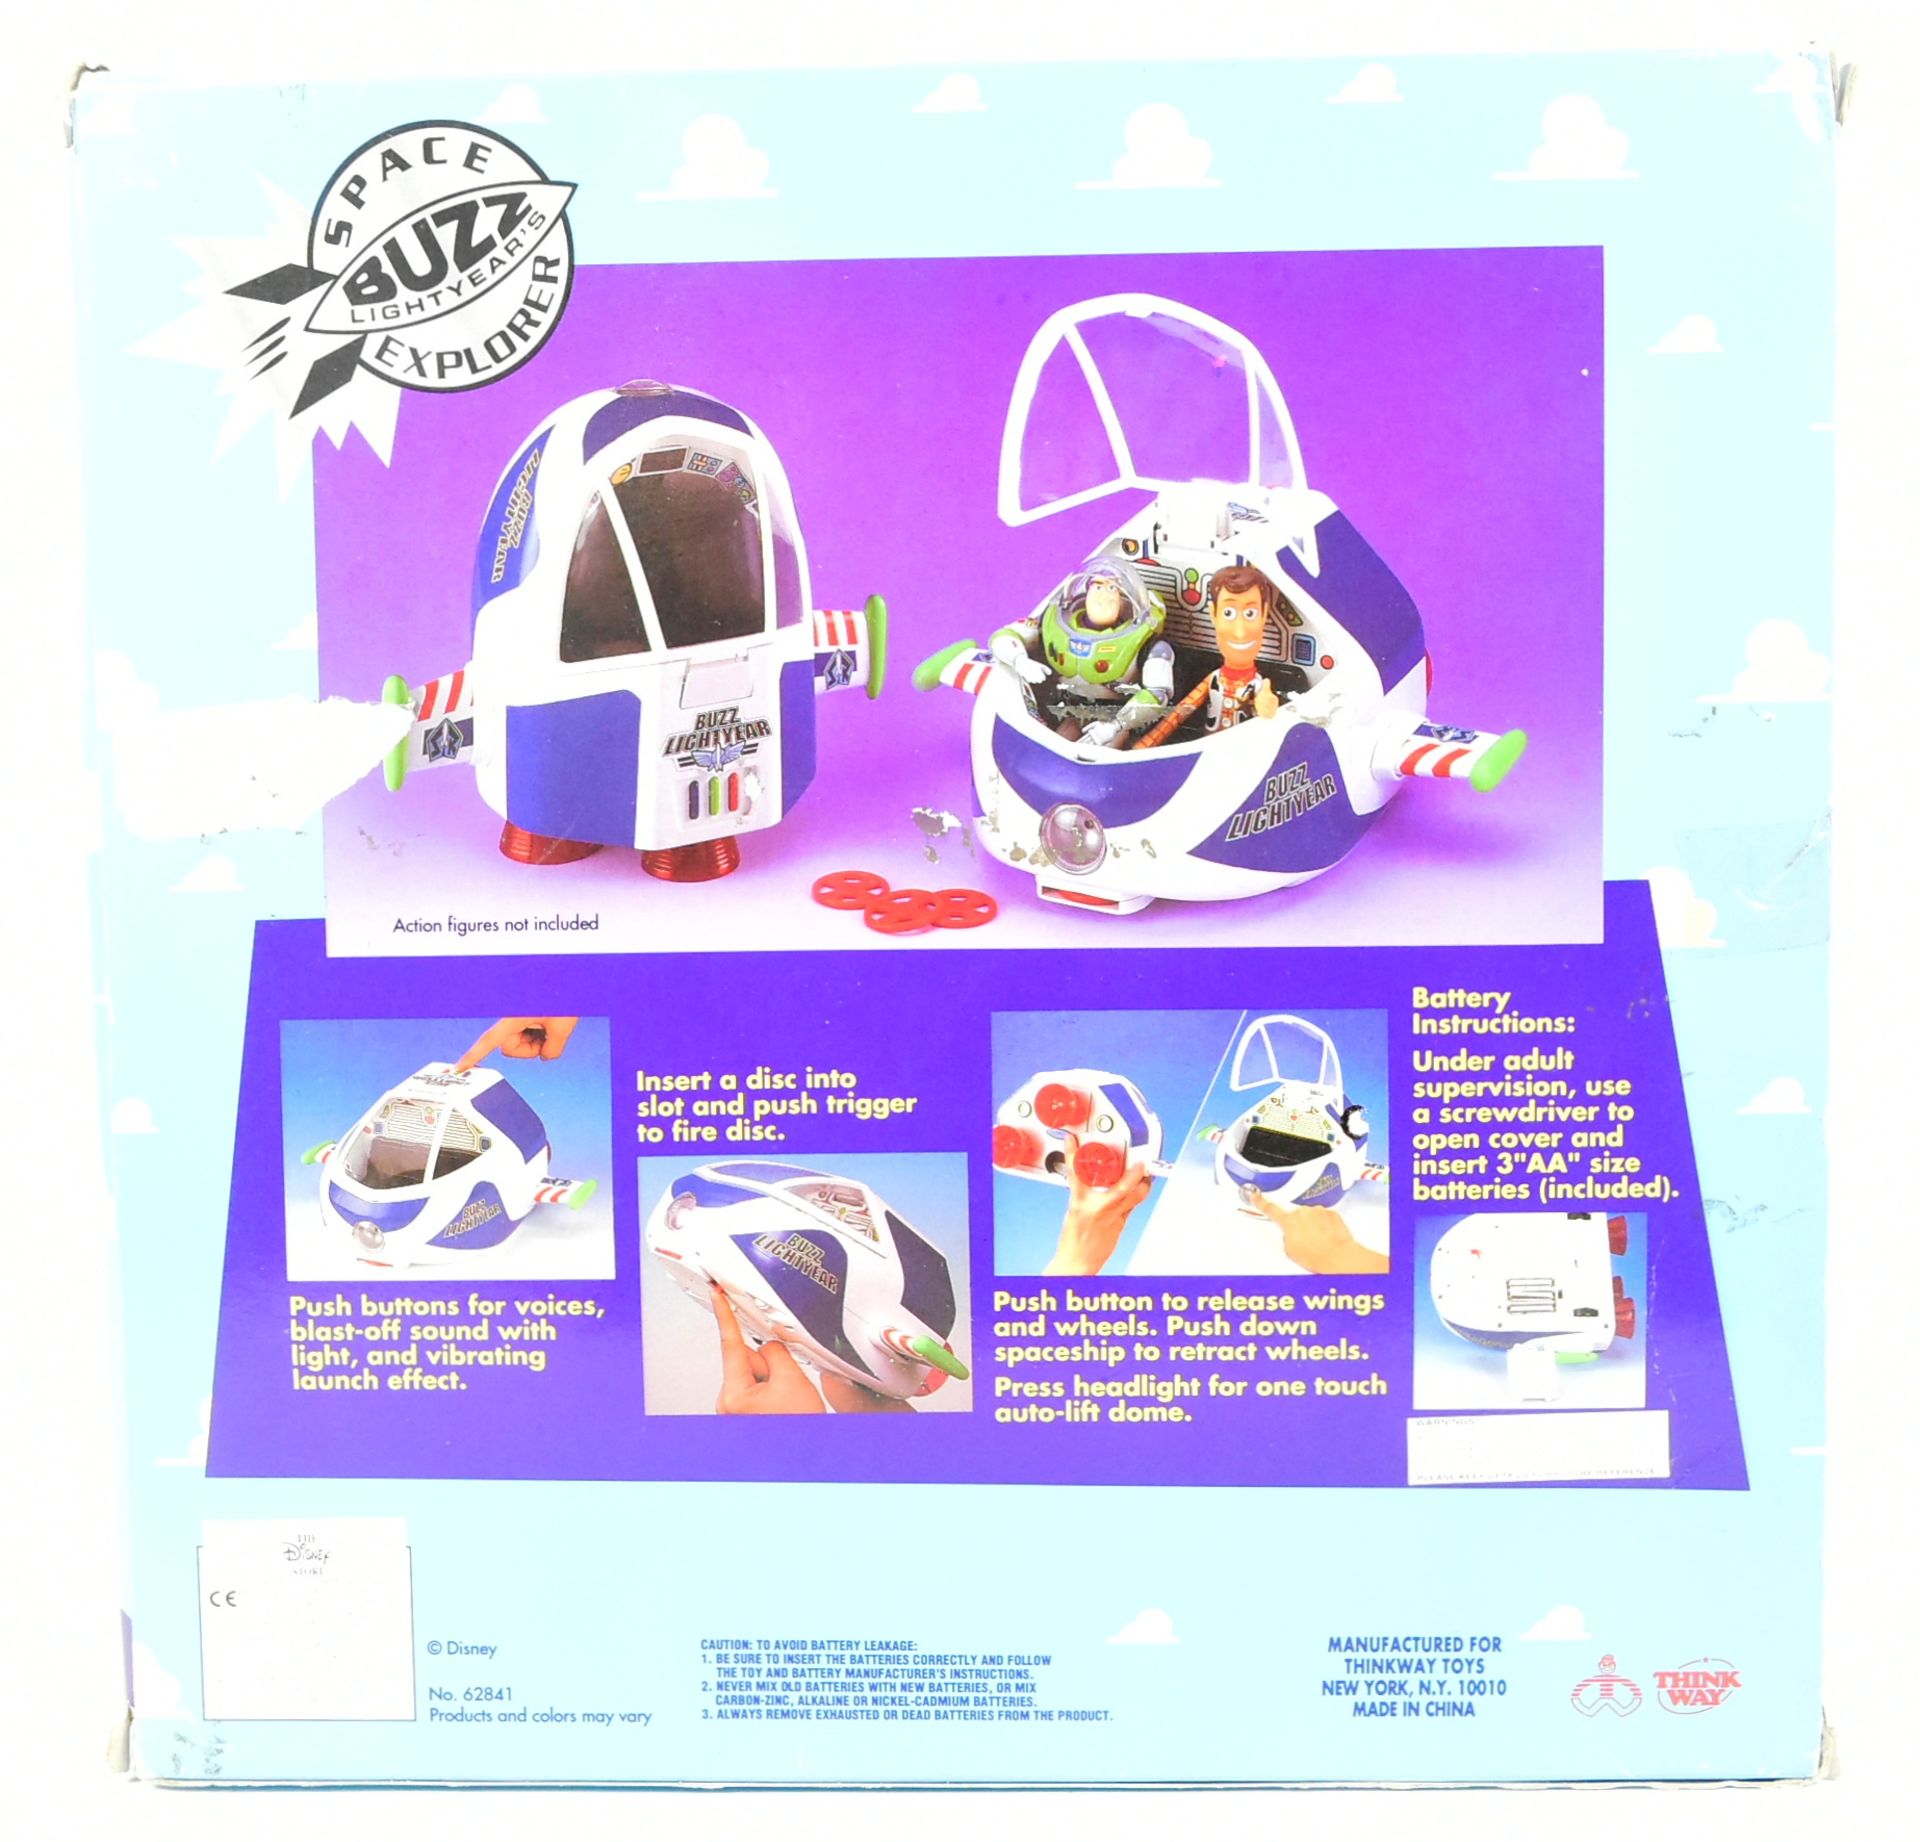 TOY STORY - THINKWAY TOYS BUZZ LIGHTYEAR SPACE EXPLORER - Image 4 of 4